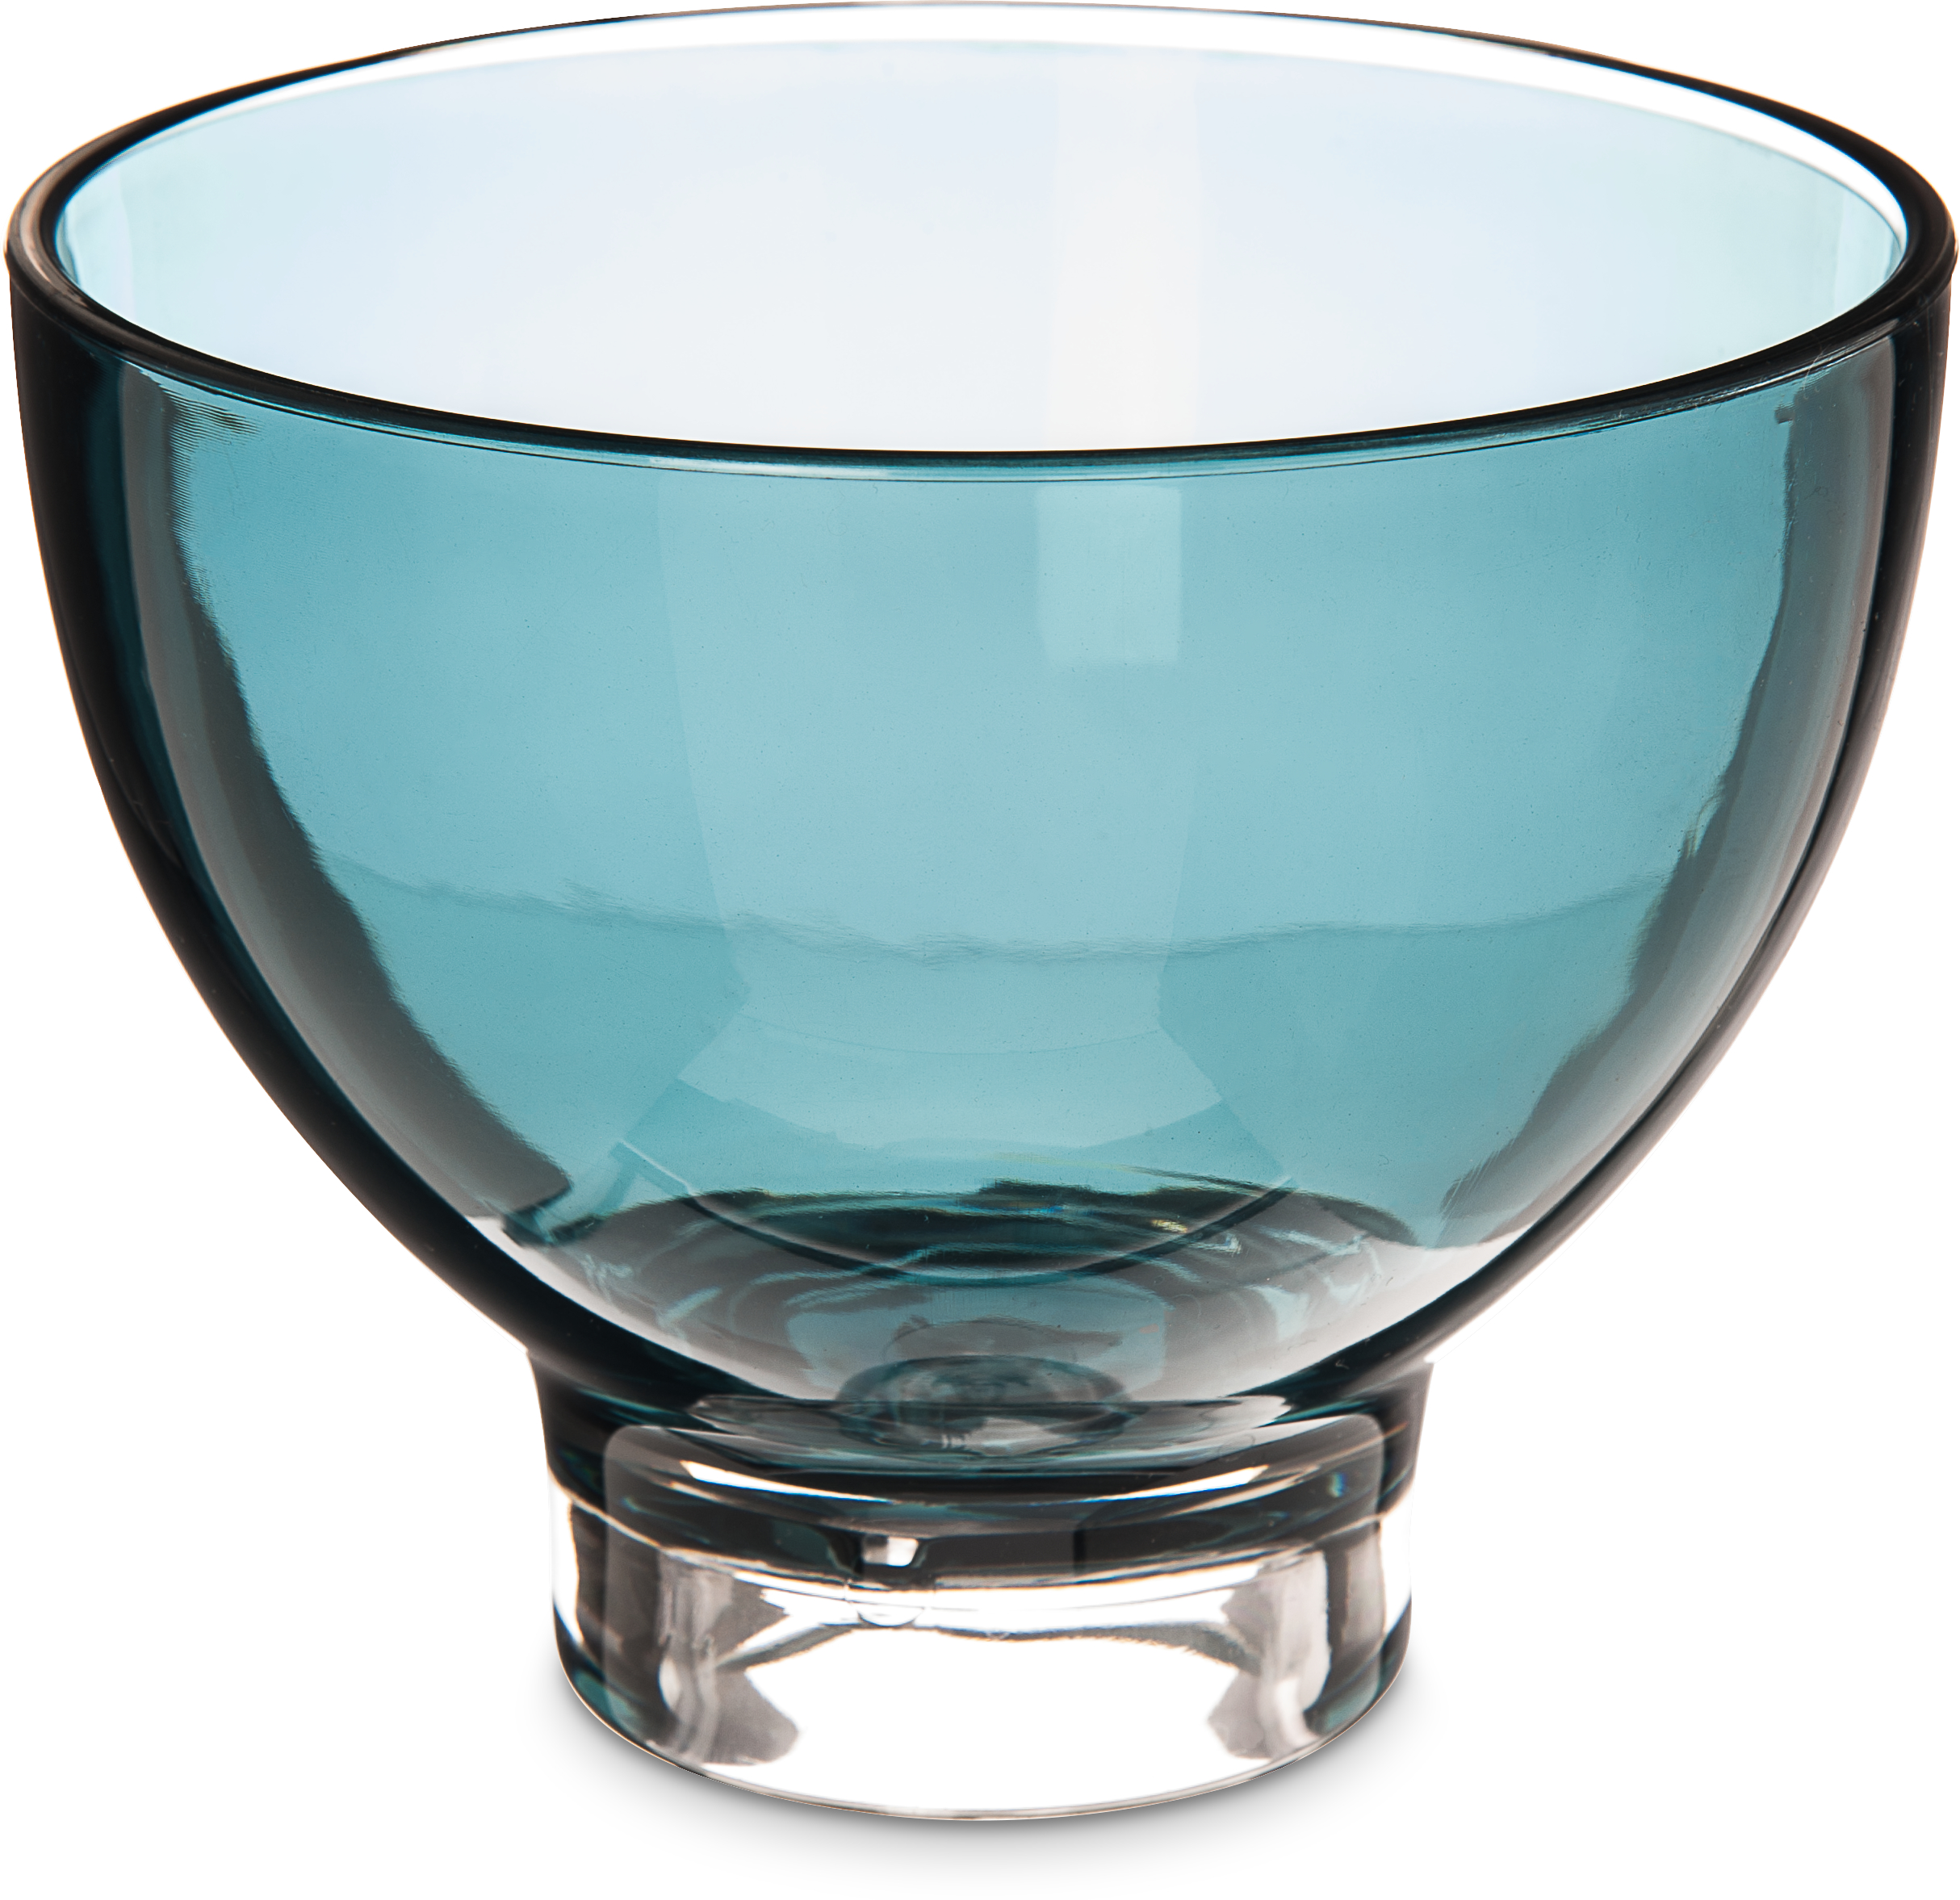 Epicure Small Cased Bowl 5.5 - Teal